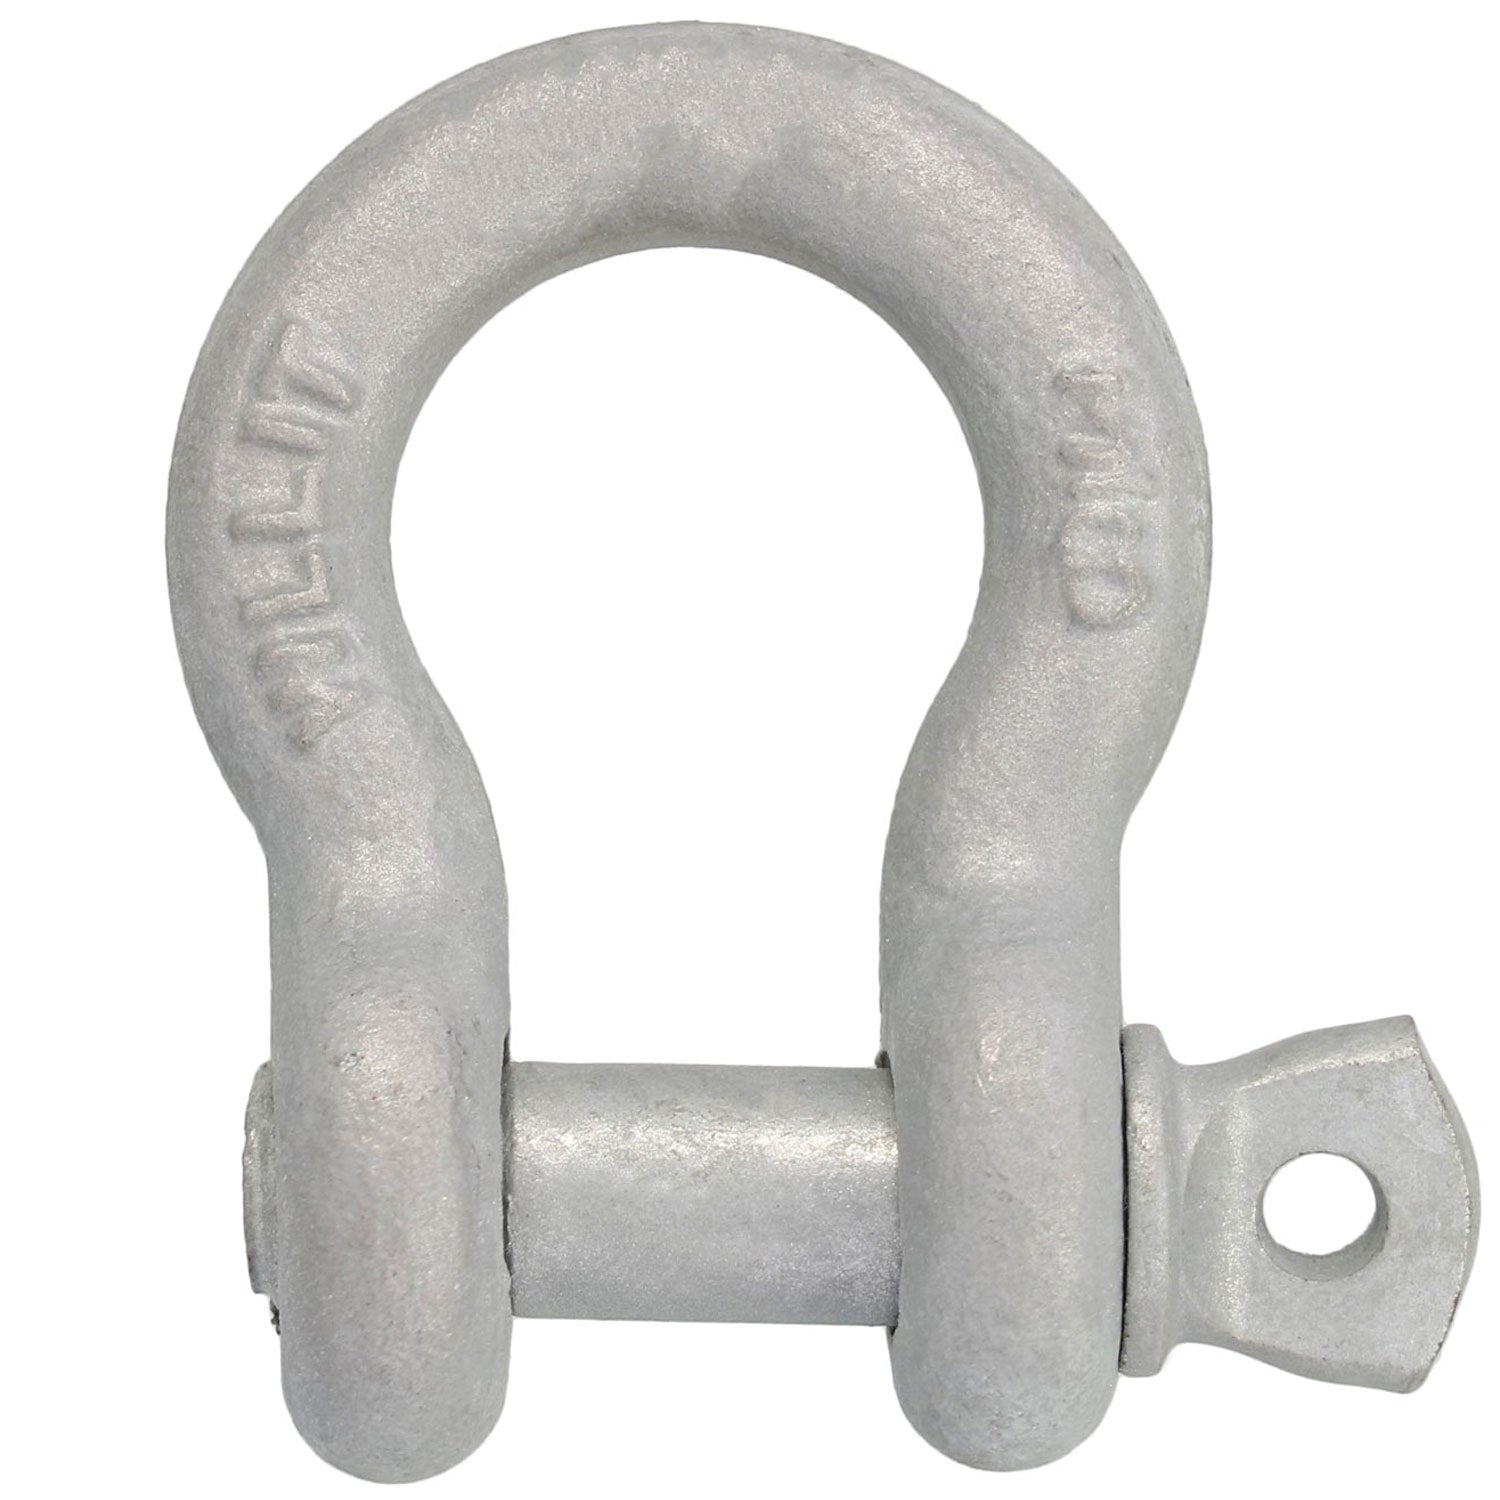 1-3/8" Screw Pin Anchor Shackle Galvanized Steel Drop Forged 27000 Lbs D Ring 